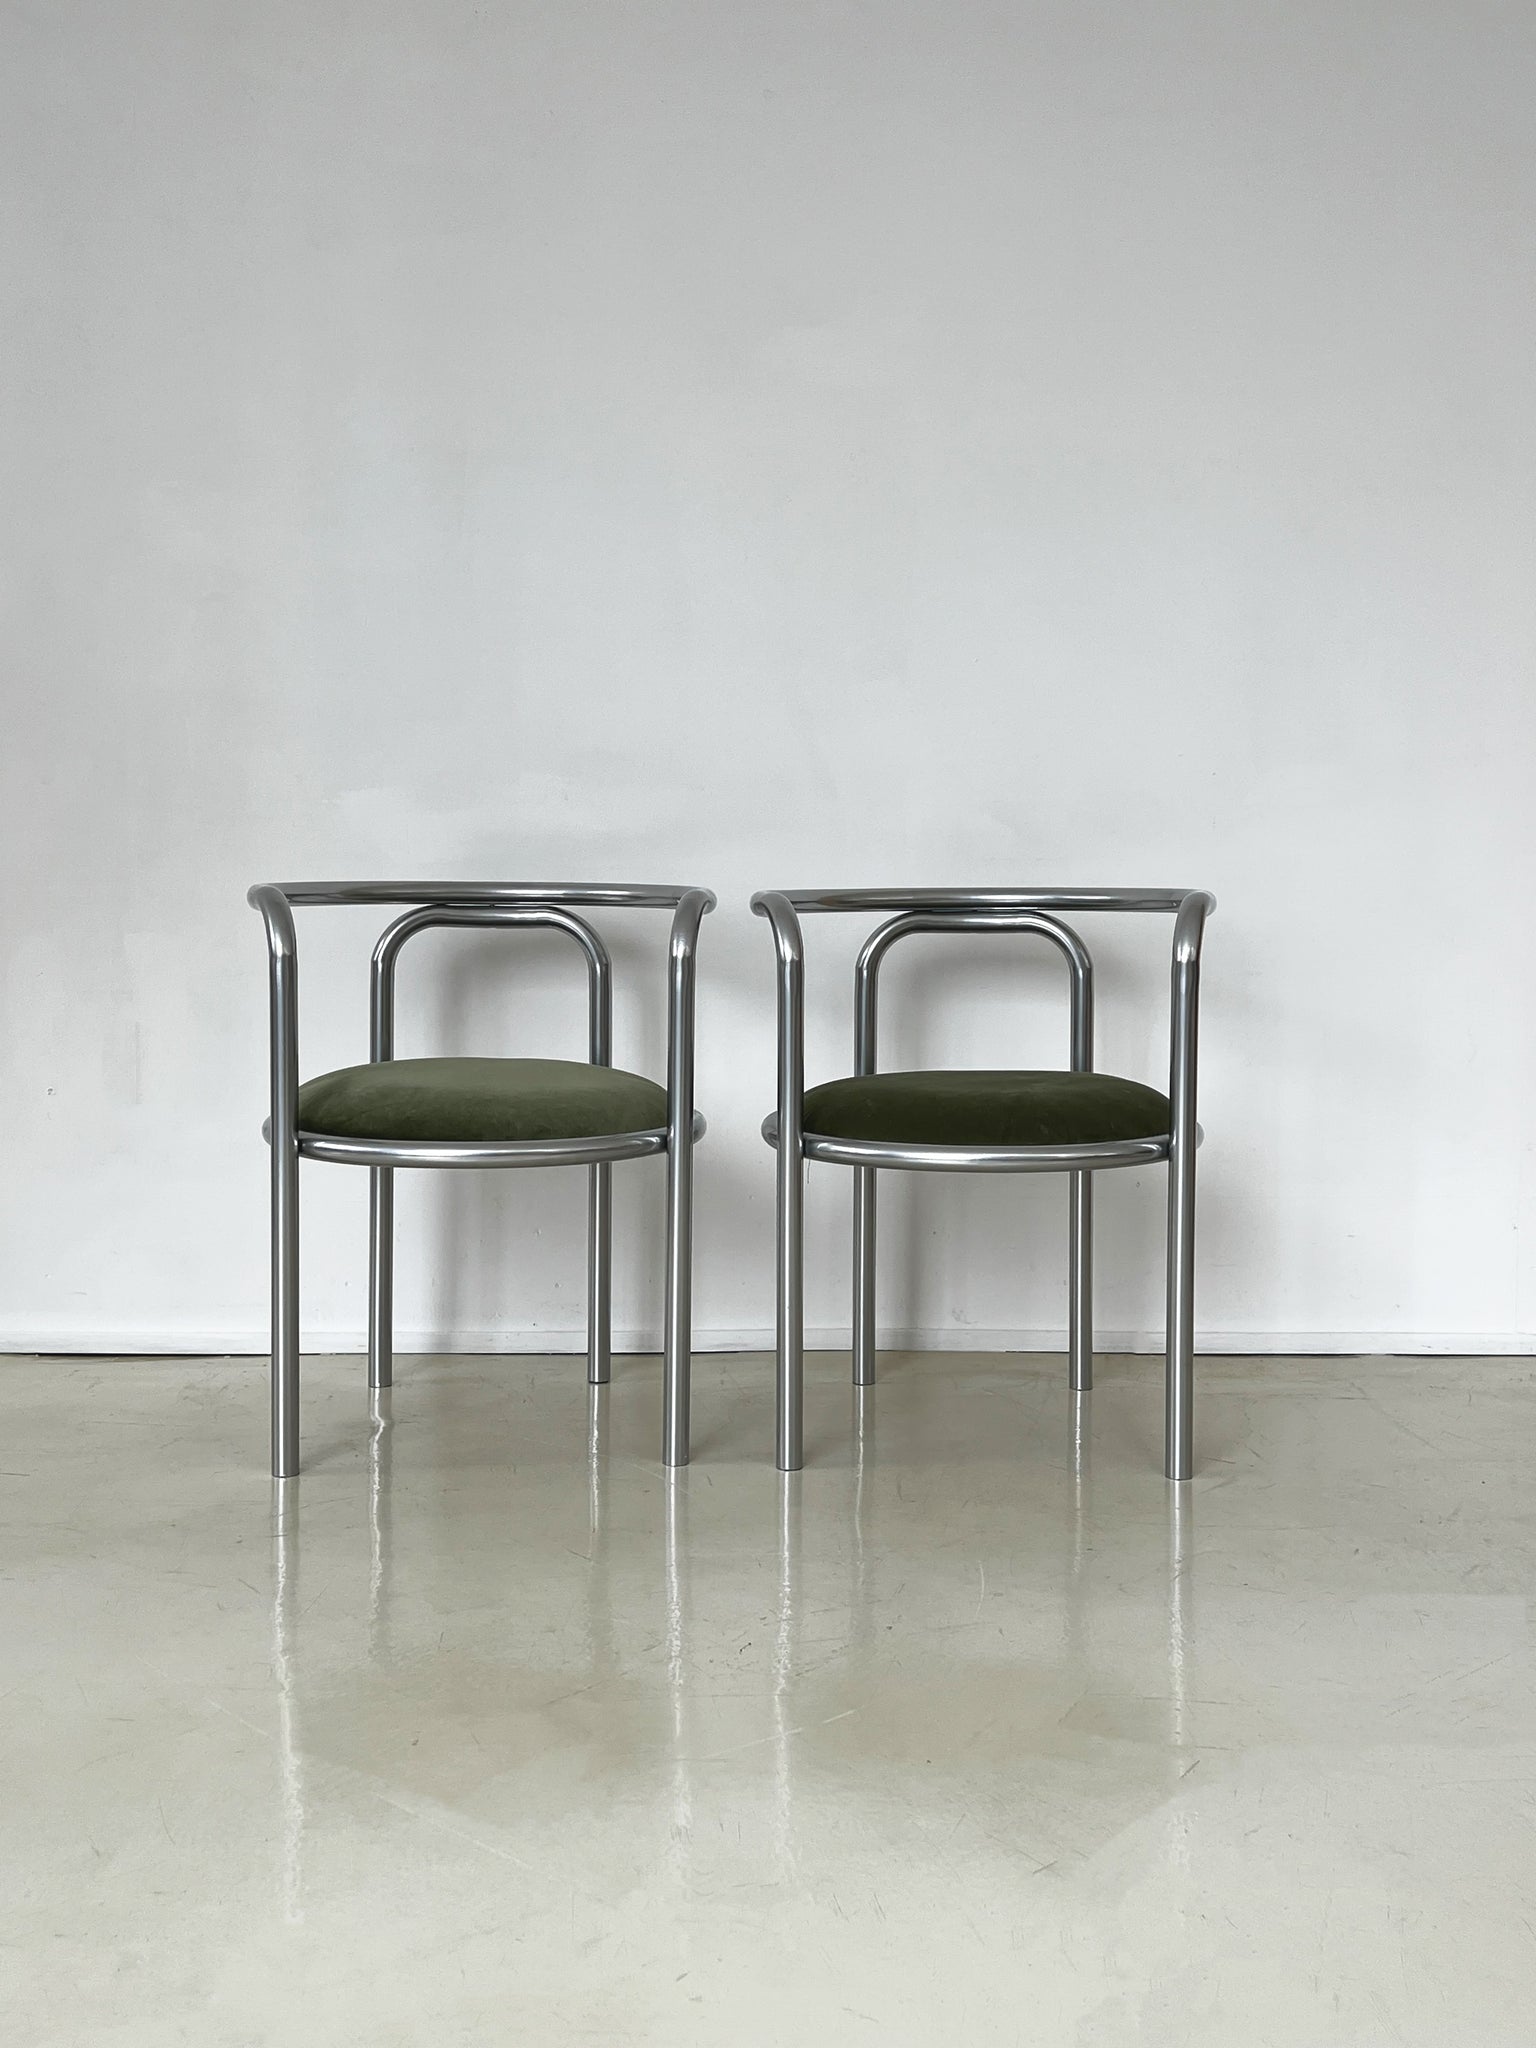 1960s Pair of "Locus Solus" Chairs by Gae Aulenti for Poltronova, Itlay